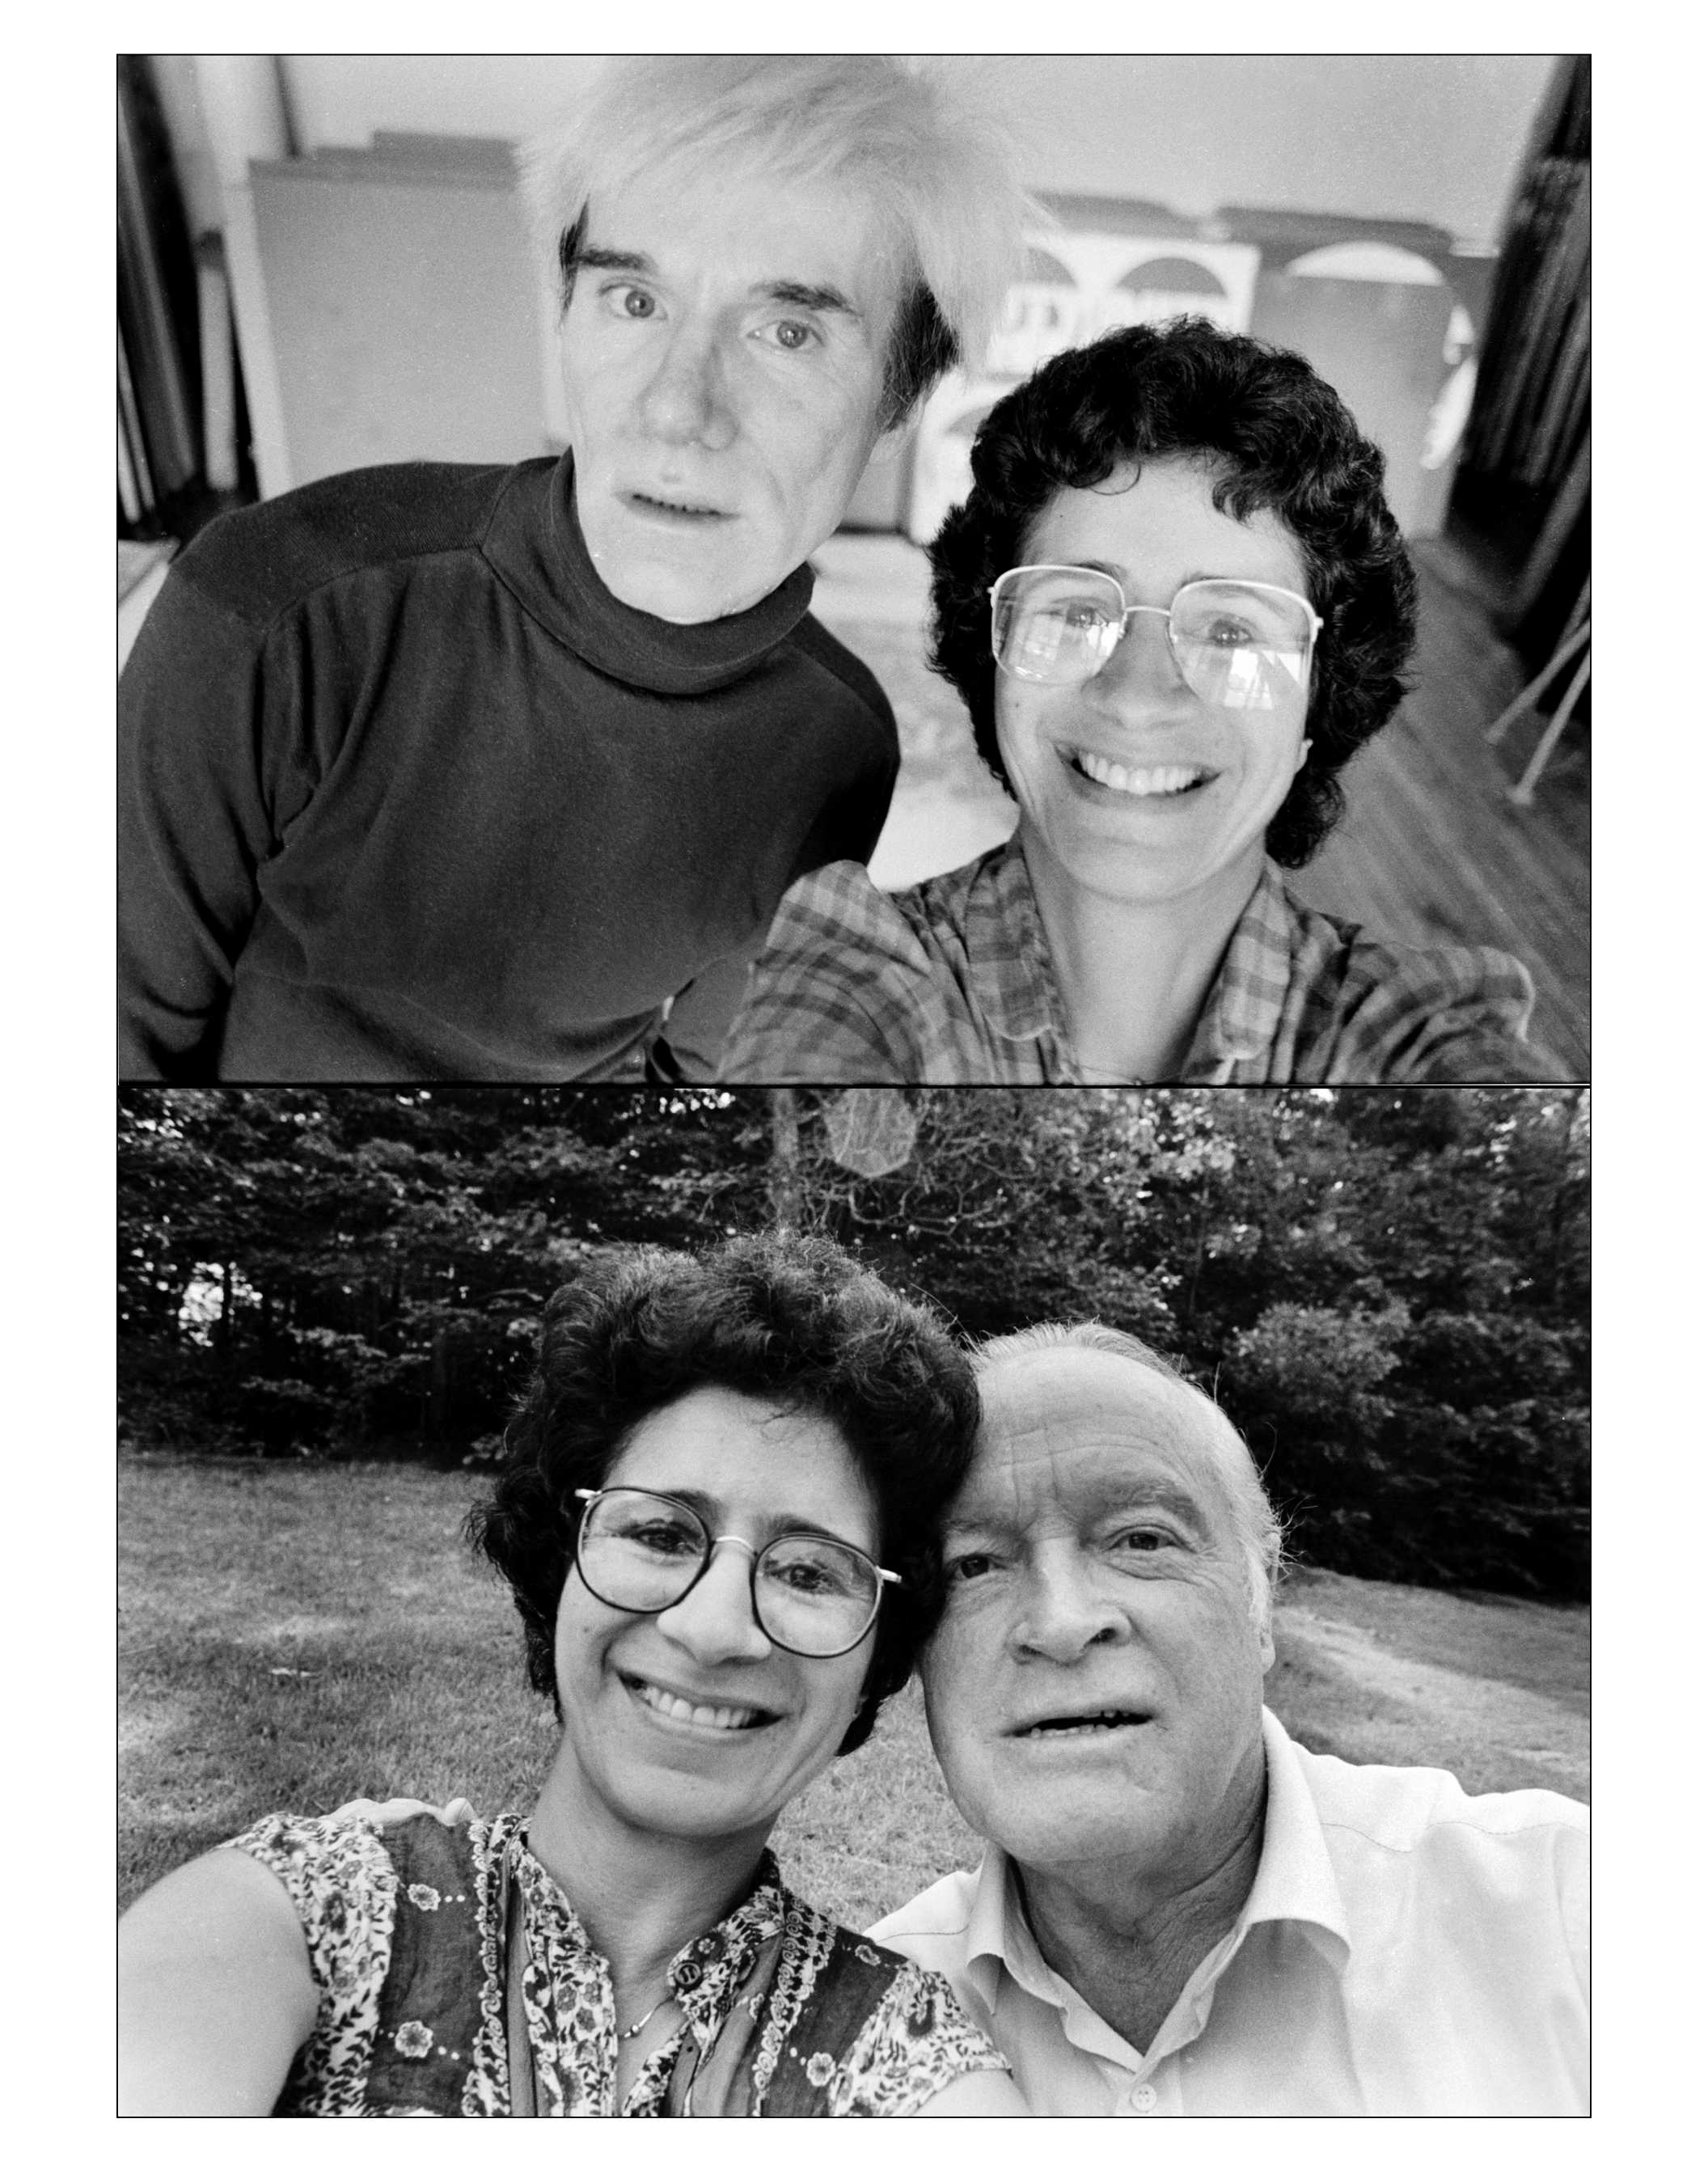 Selfies, before selfies. Top, with Andy Warhol in his NYC studio. Bottom, with Bob Hope on a Redding, Conn. golf course. 1980’s